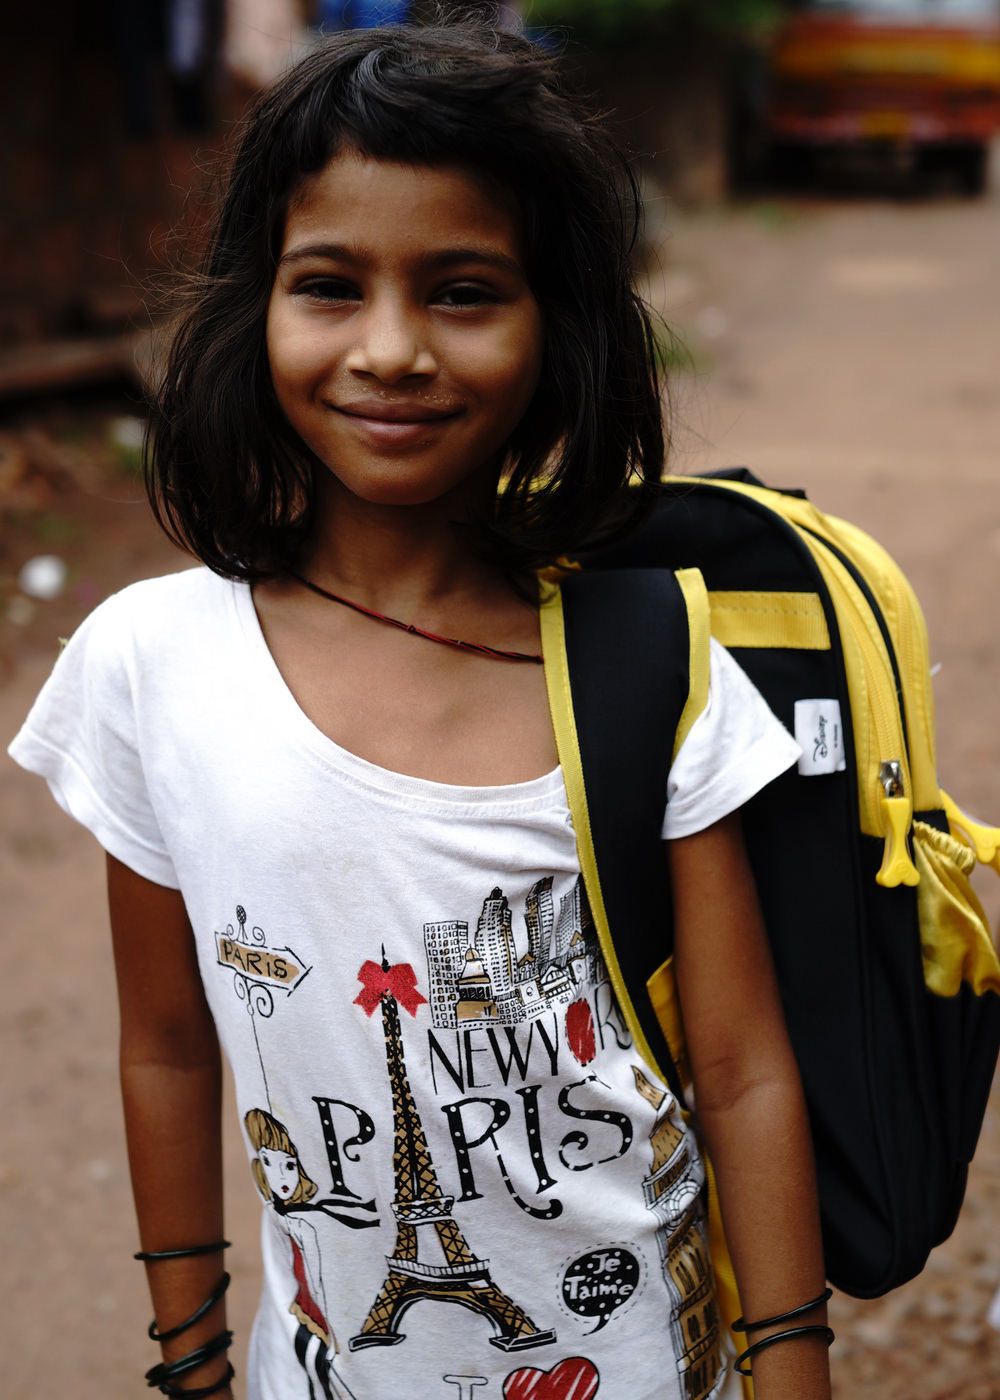 Young Girl With New Bag